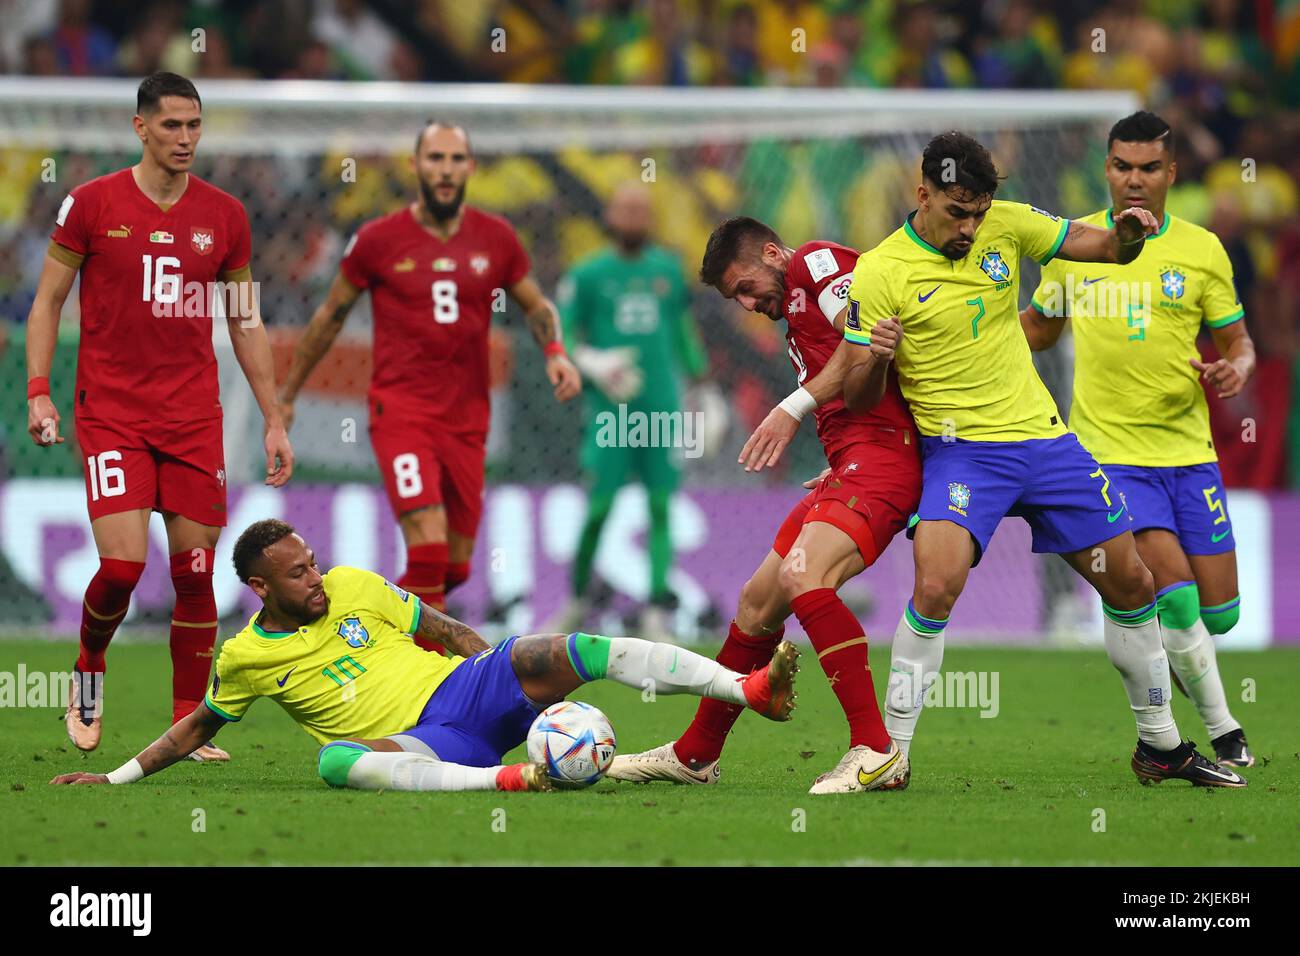 Doha, Qatar. 24th Nov, 2022. Neymar (L) of Brazil in action with Dusan Tadic of Serbia during the 2022 FIFA World Cup Group G match at Lusail Stadium in Doha, Qatar on November 24, 2022. Photo by Chris Brunskill/UPI Credit: UPI/Alamy Live News Stock Photo